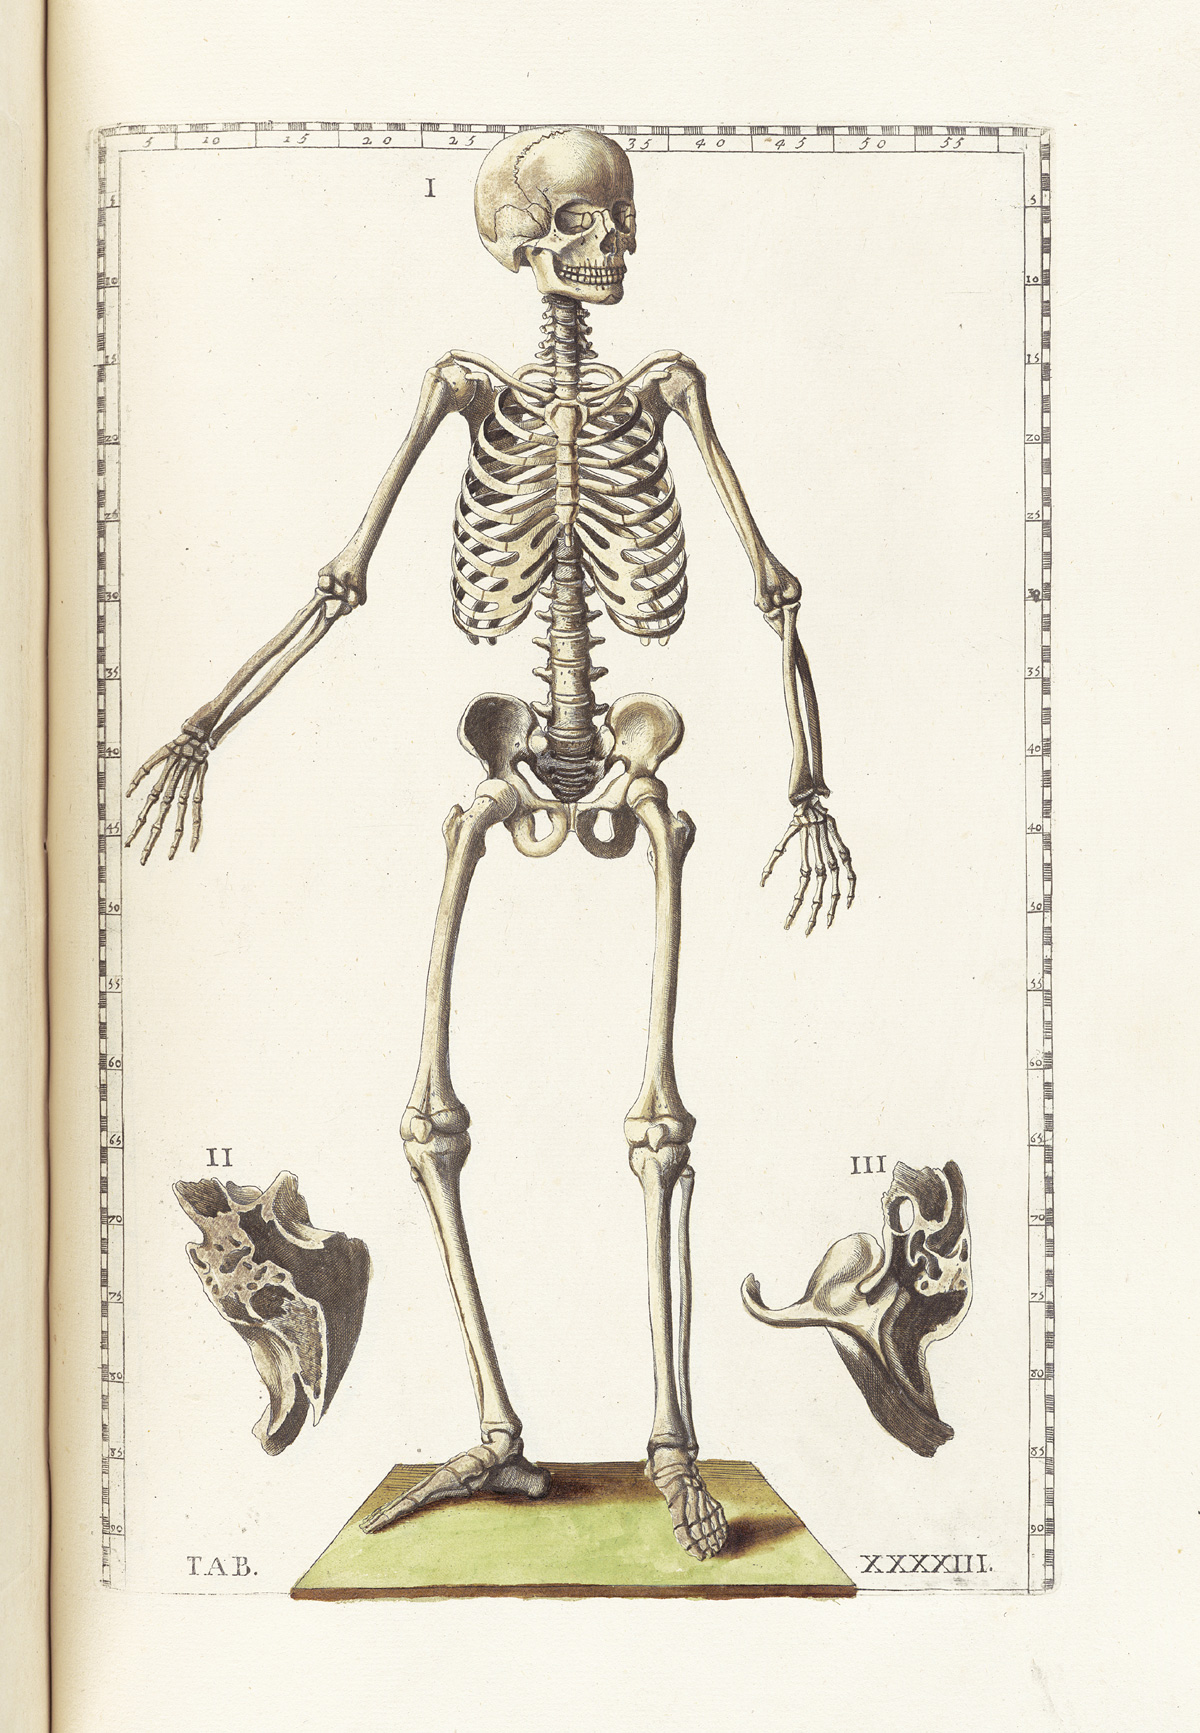 Hand-colored etching of a standing facing skeleton figure, looking to the right side of the page; on either side of the figure in the bottom half of the page are cross sections of the mastoid bone, showing the cavities within; from Bartholomeo Eustachi’s Tabulae anatomicae, NLM Call no.: WZ 260 E87t 1783.